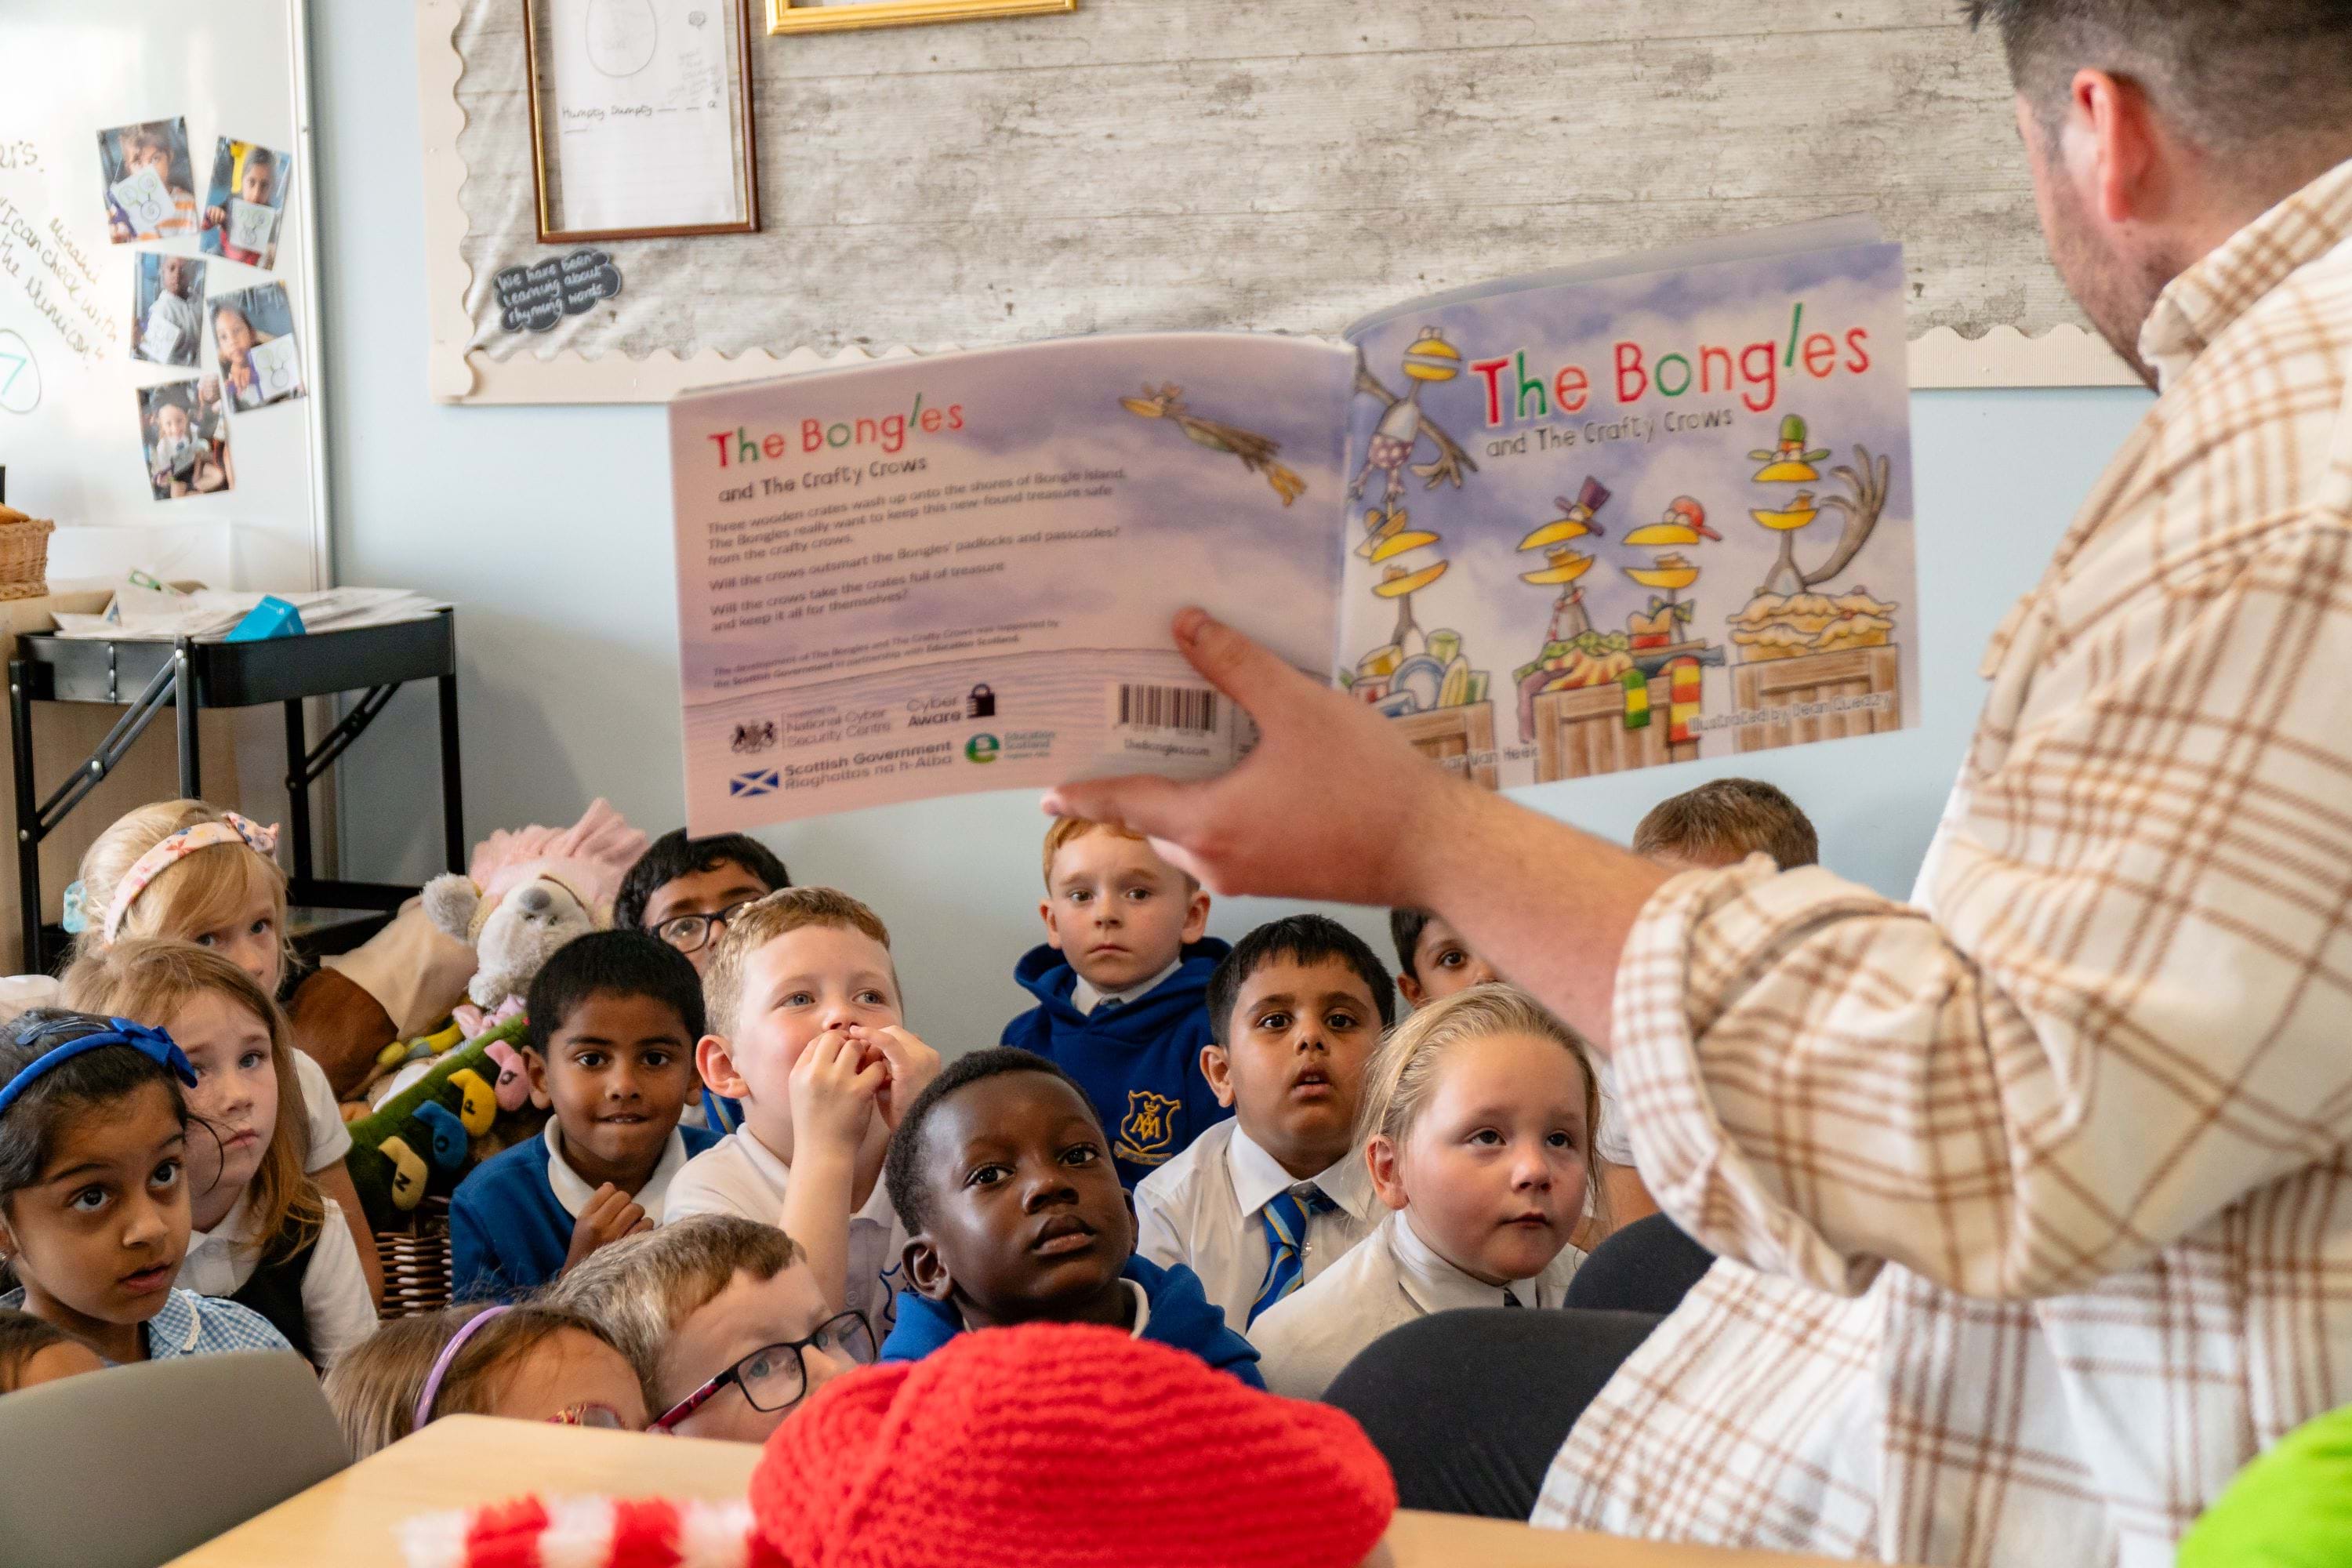 Children in a classroom listening to their teacher reading The Bongles